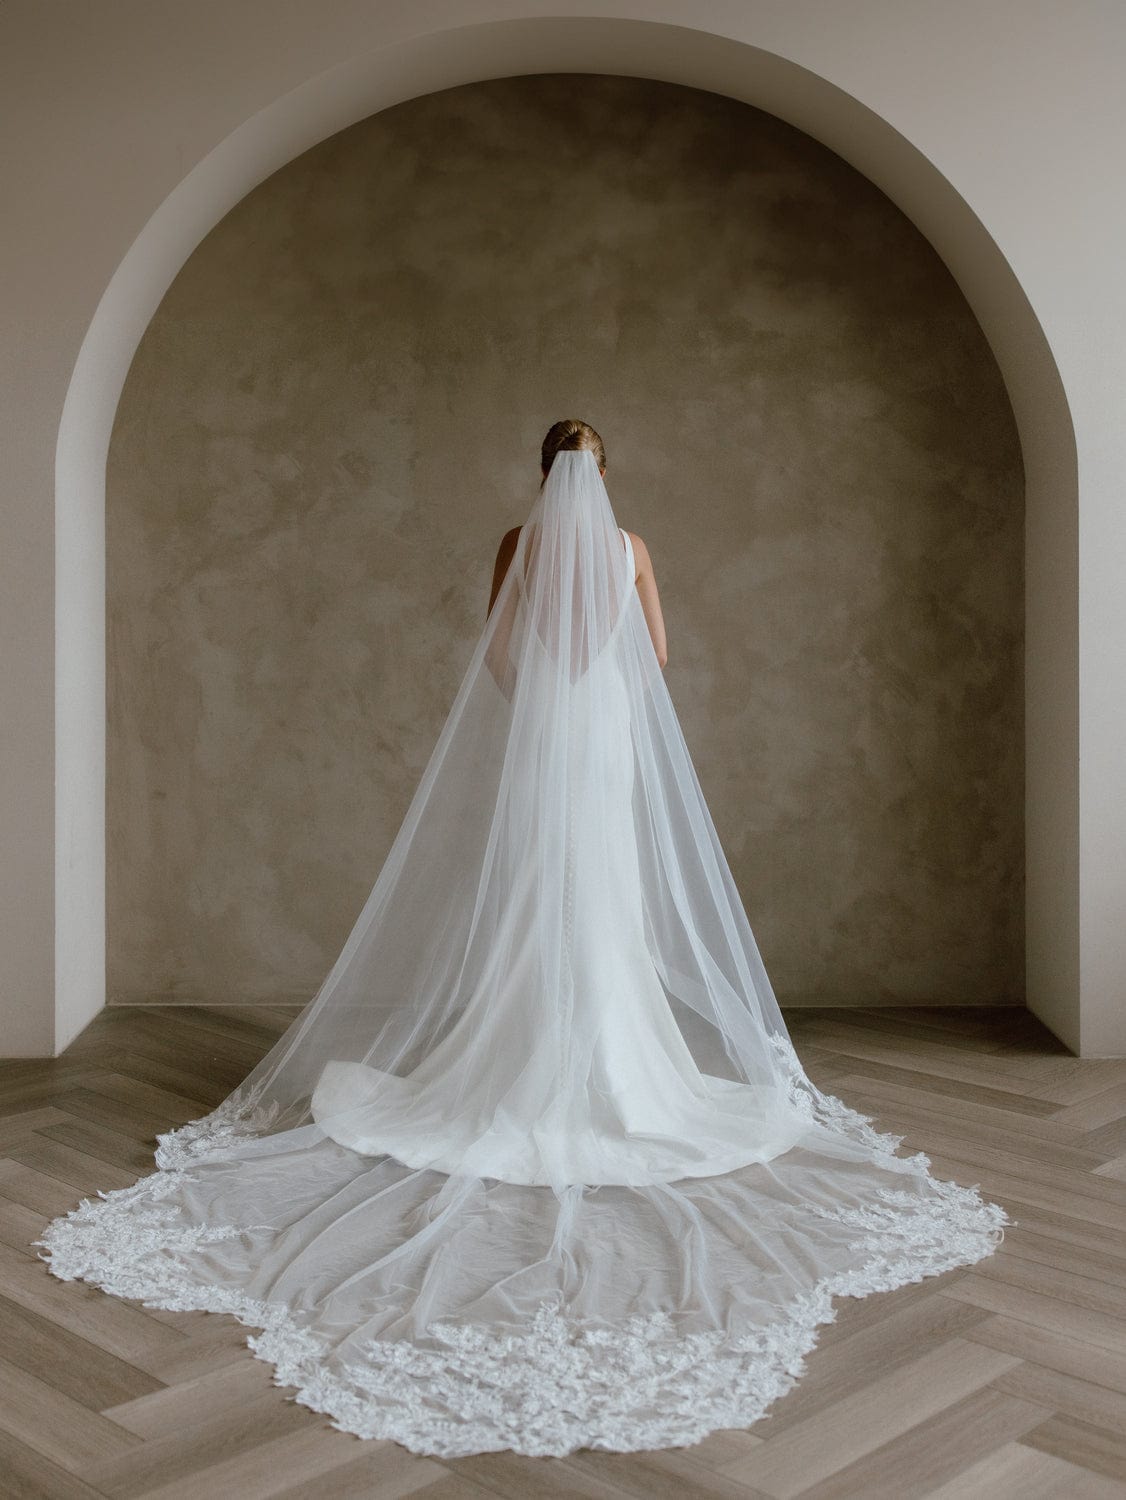 Chic Bridals Bridal Veils Dayna Veil Shop The Dayna Veil In Two Different Colors Wedding Gowns